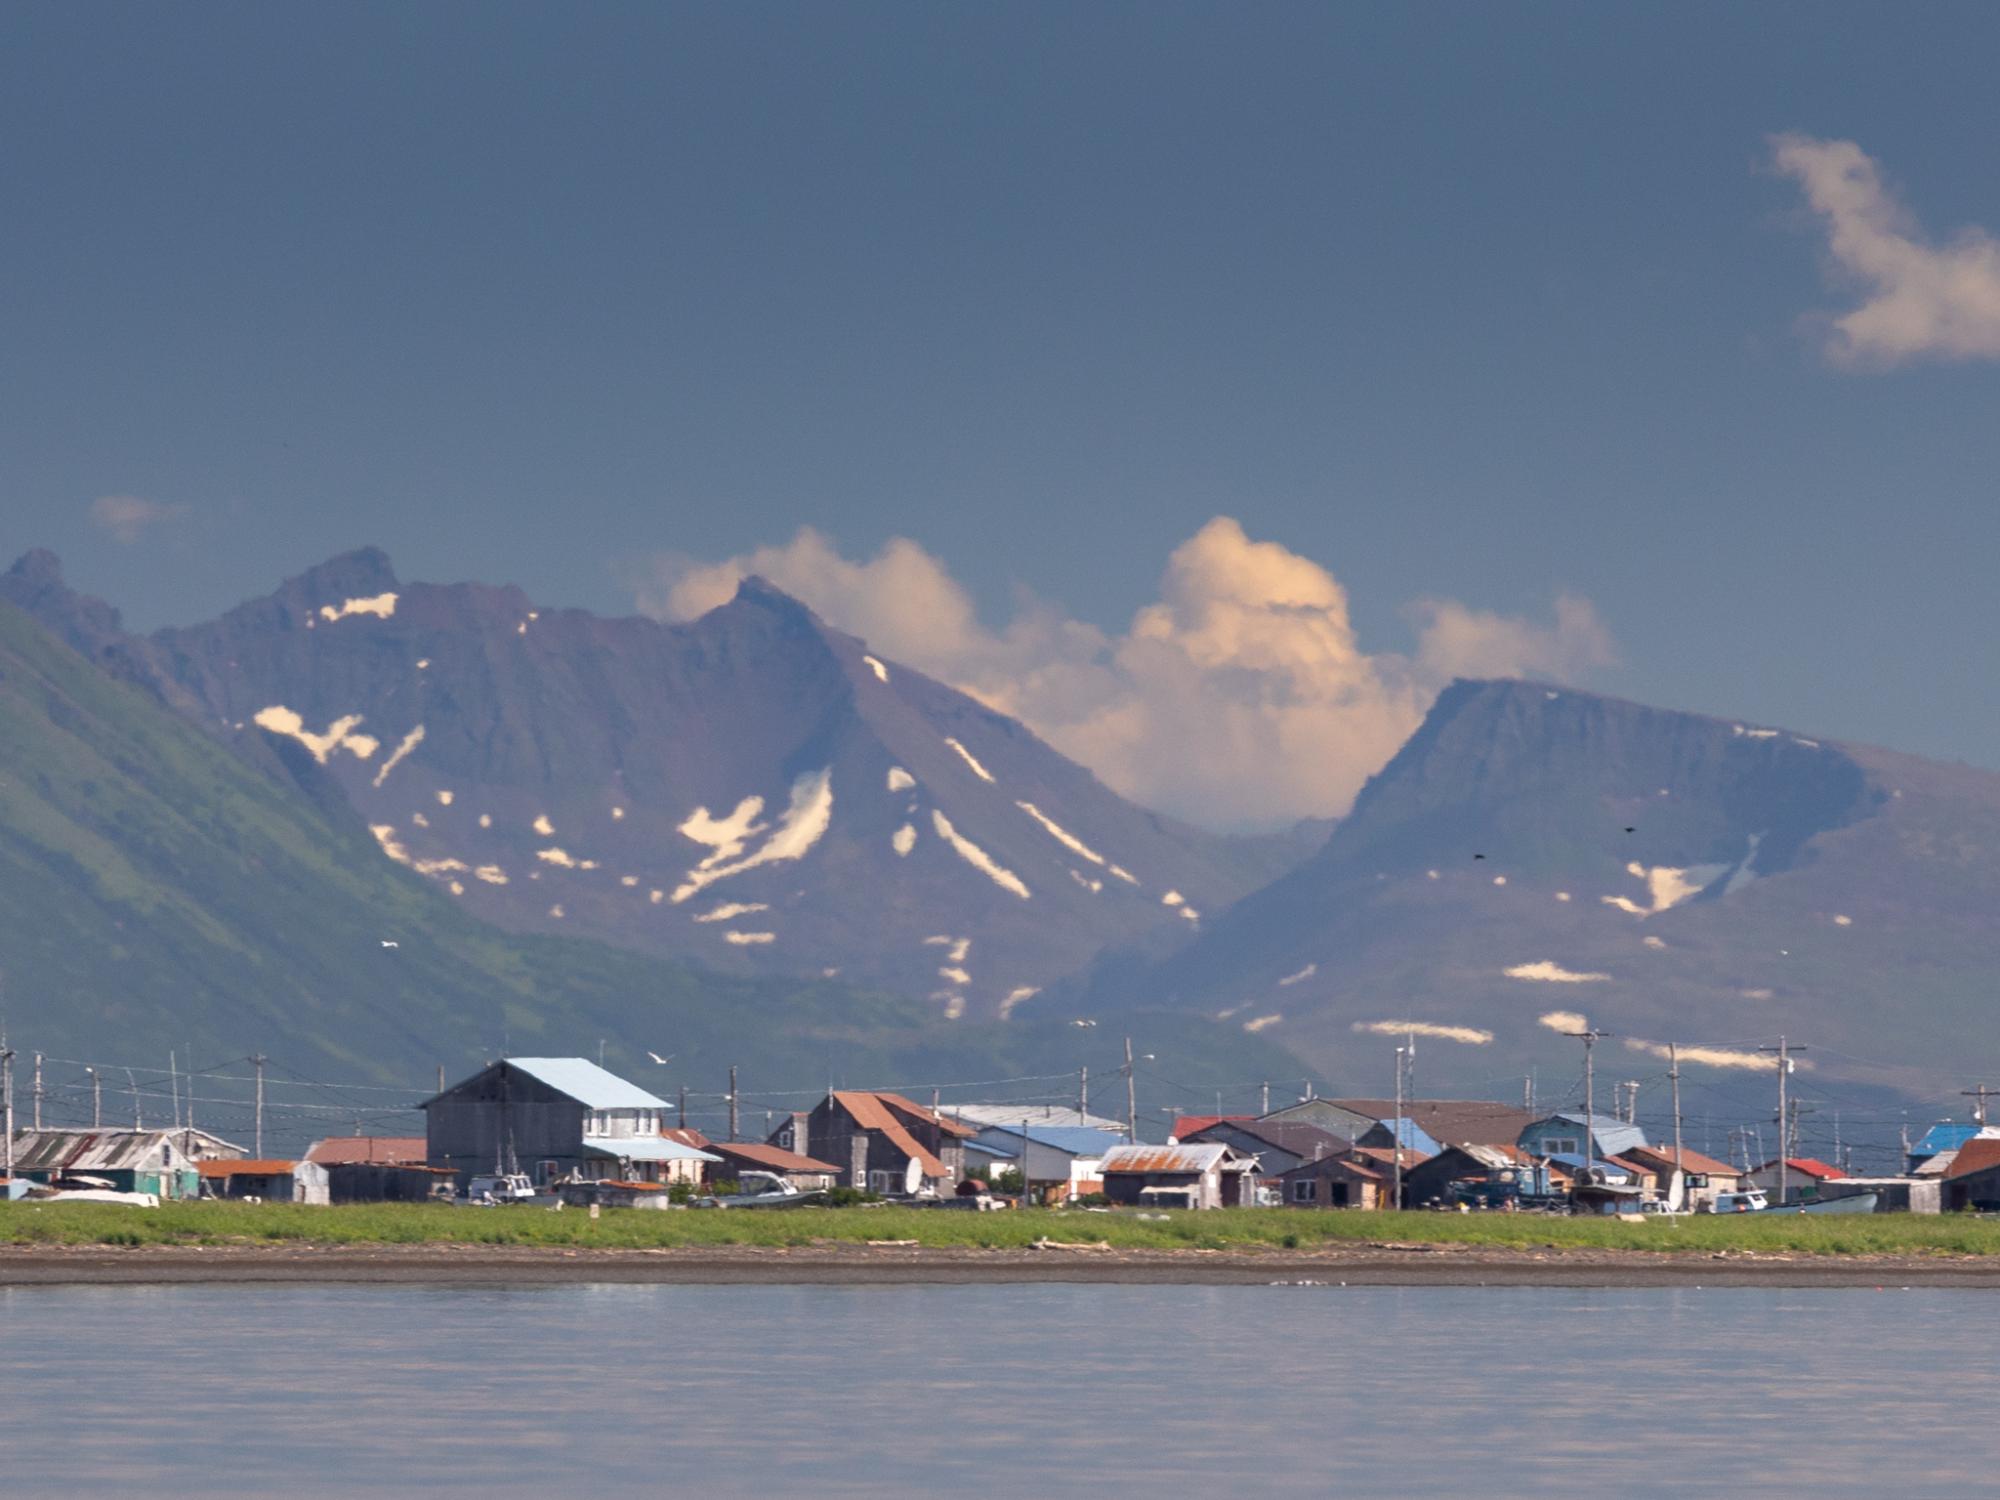 Walrus Islands - The village of Togiak as seen from the boat returning...